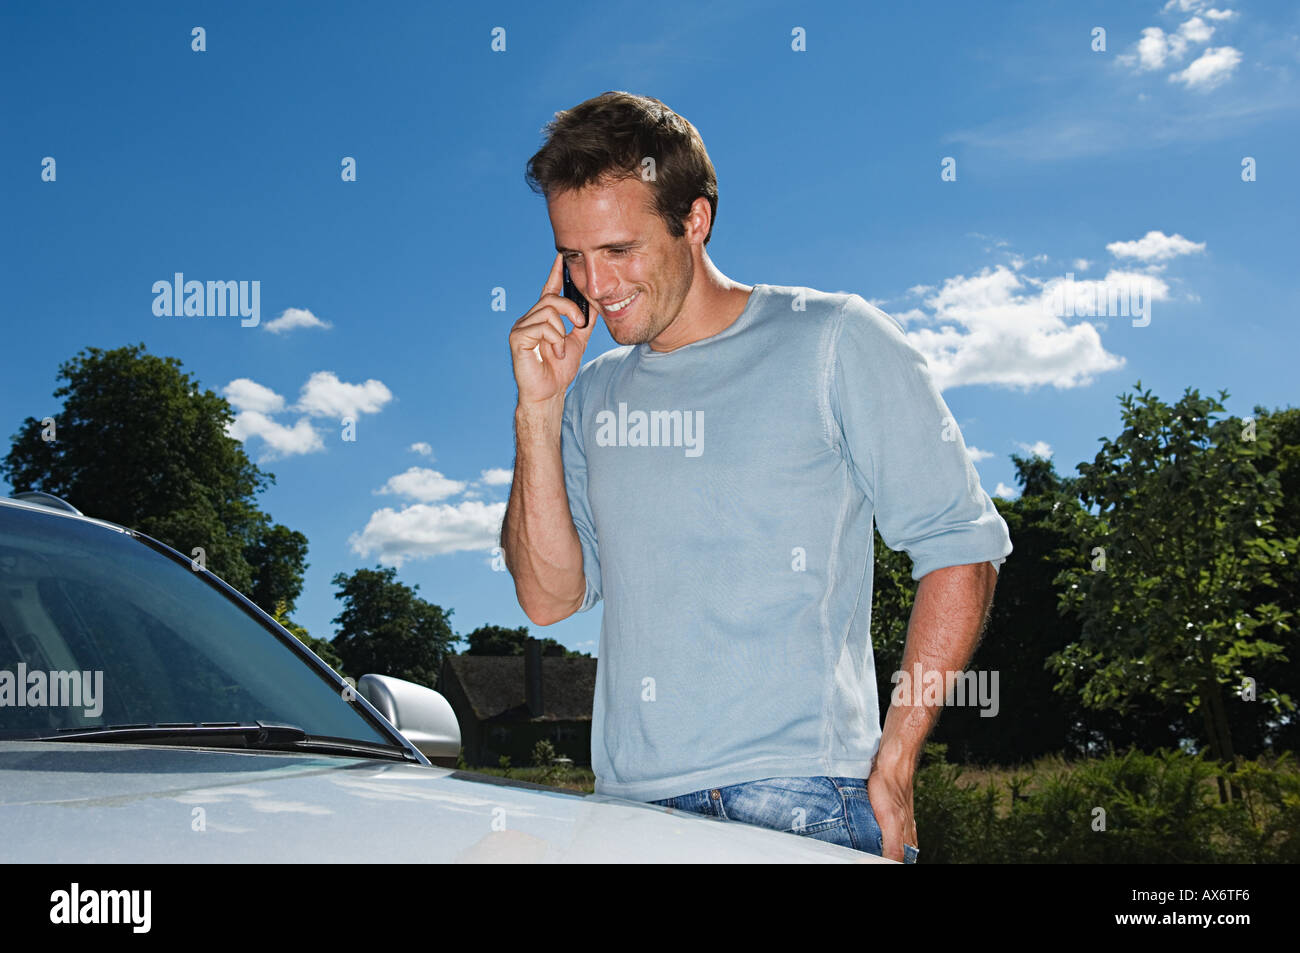 Man in mobile phone by his car Stock Photo